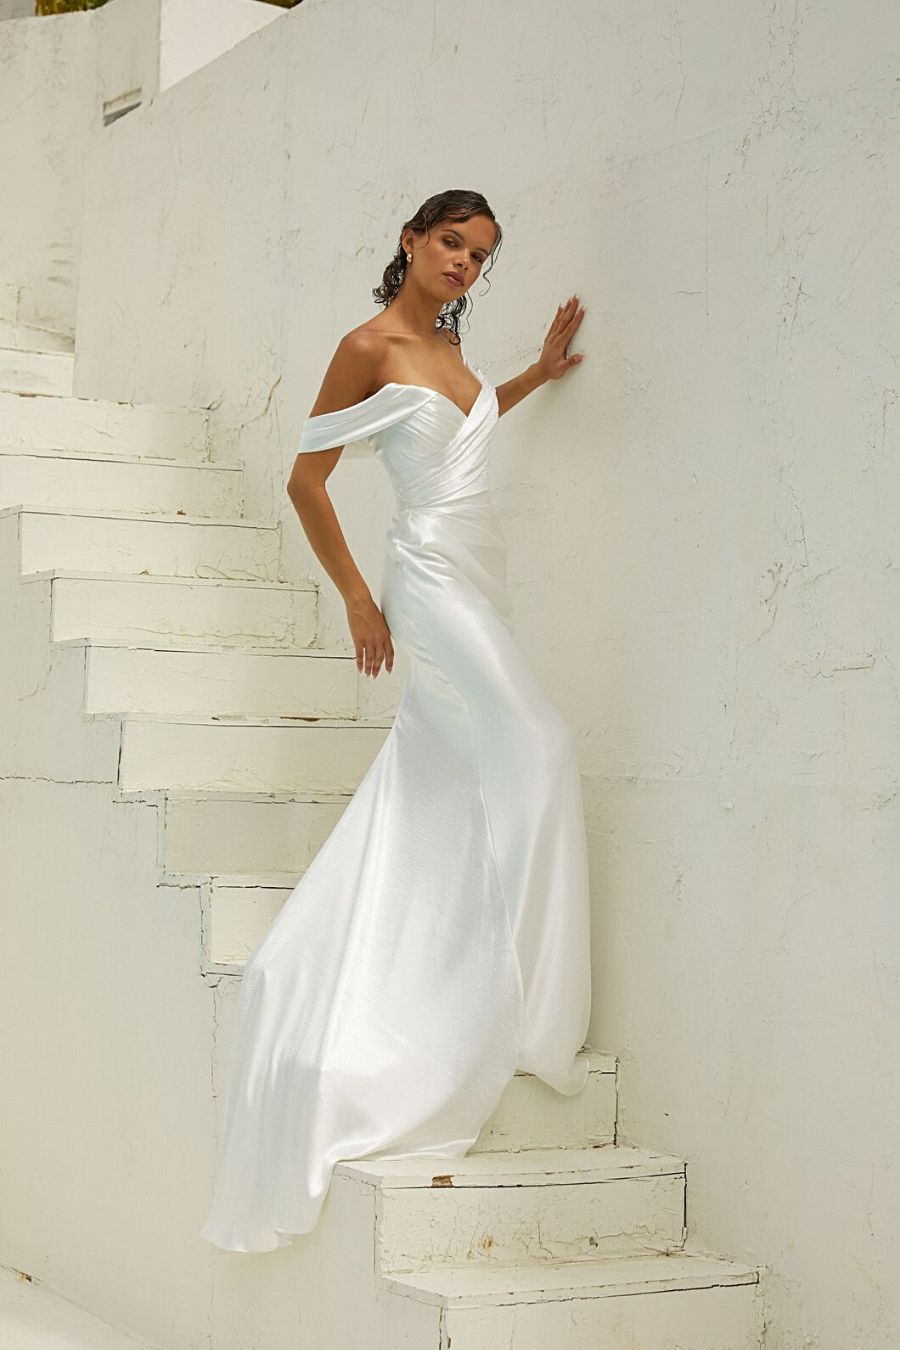 Bride walking up stairs in satin fitted wedding dress with off shoulder neckline